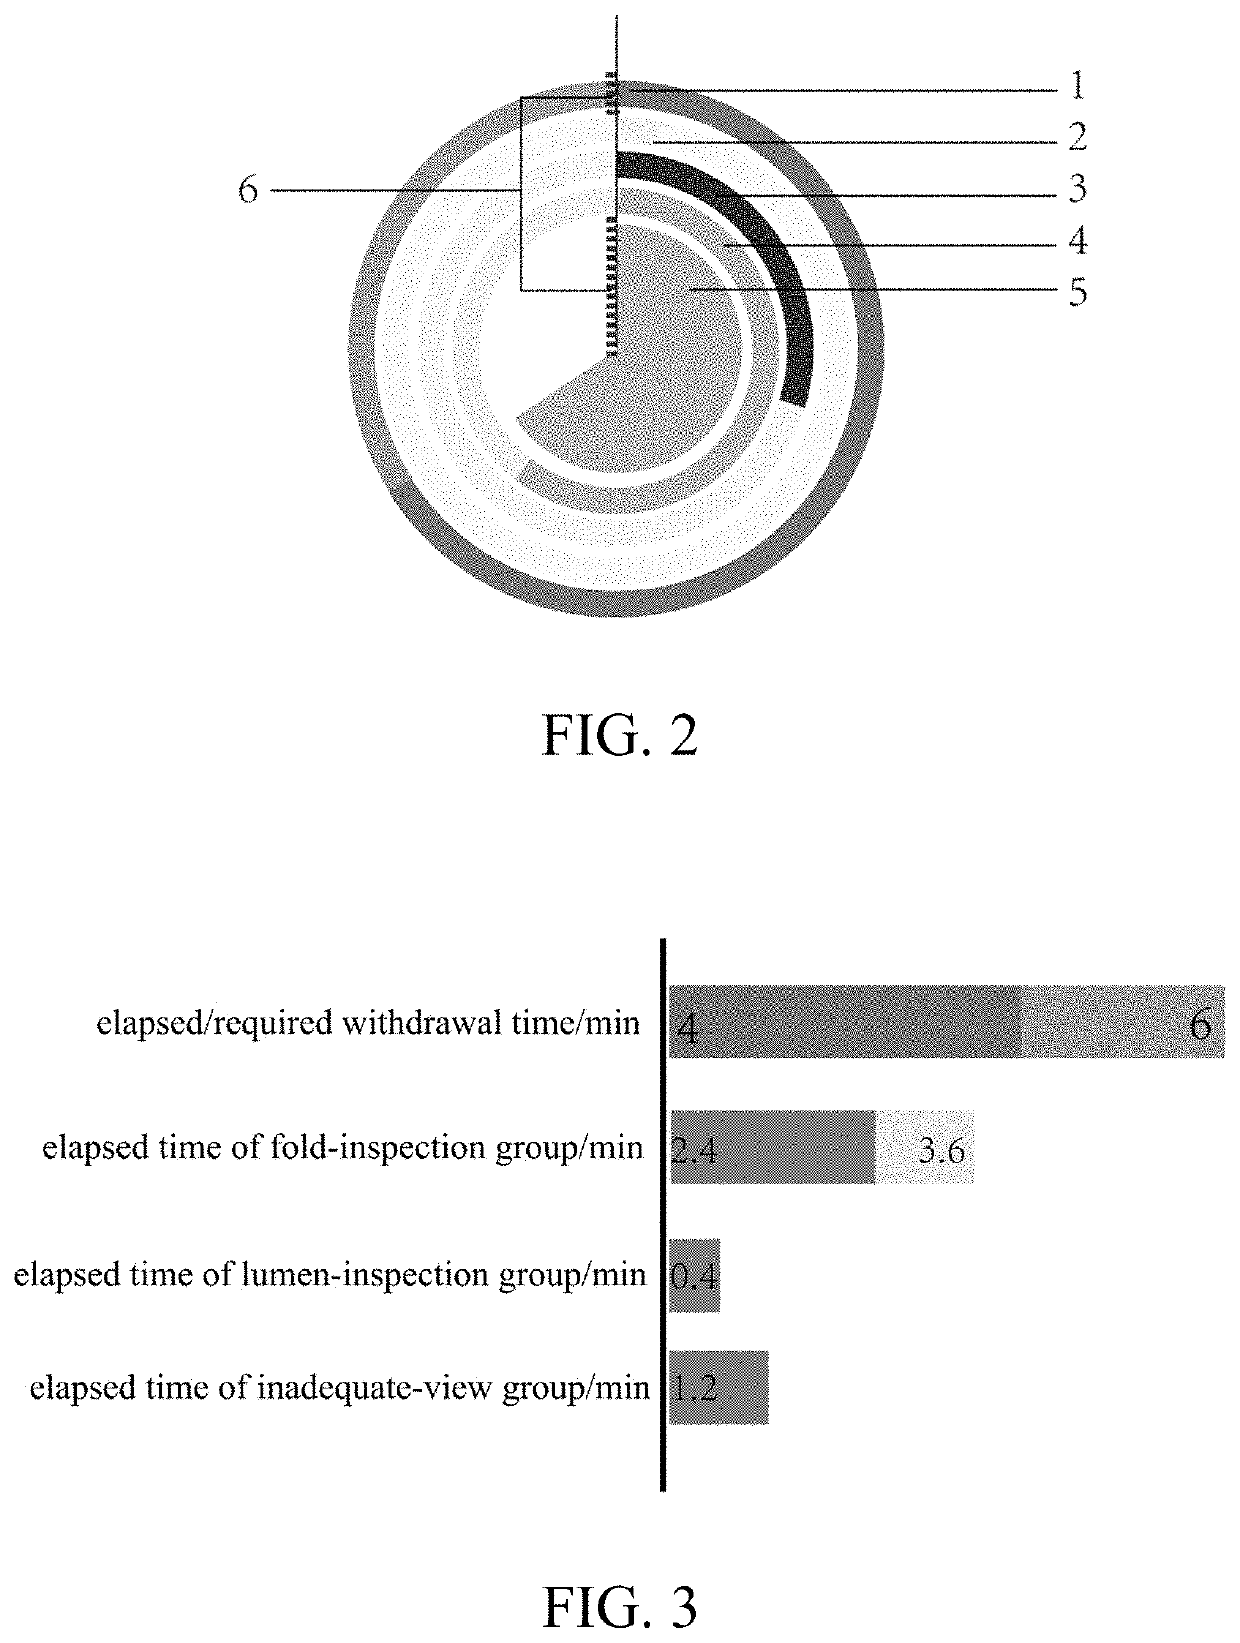 Method, system and computer readable medium for evaluating colonoscopy performance